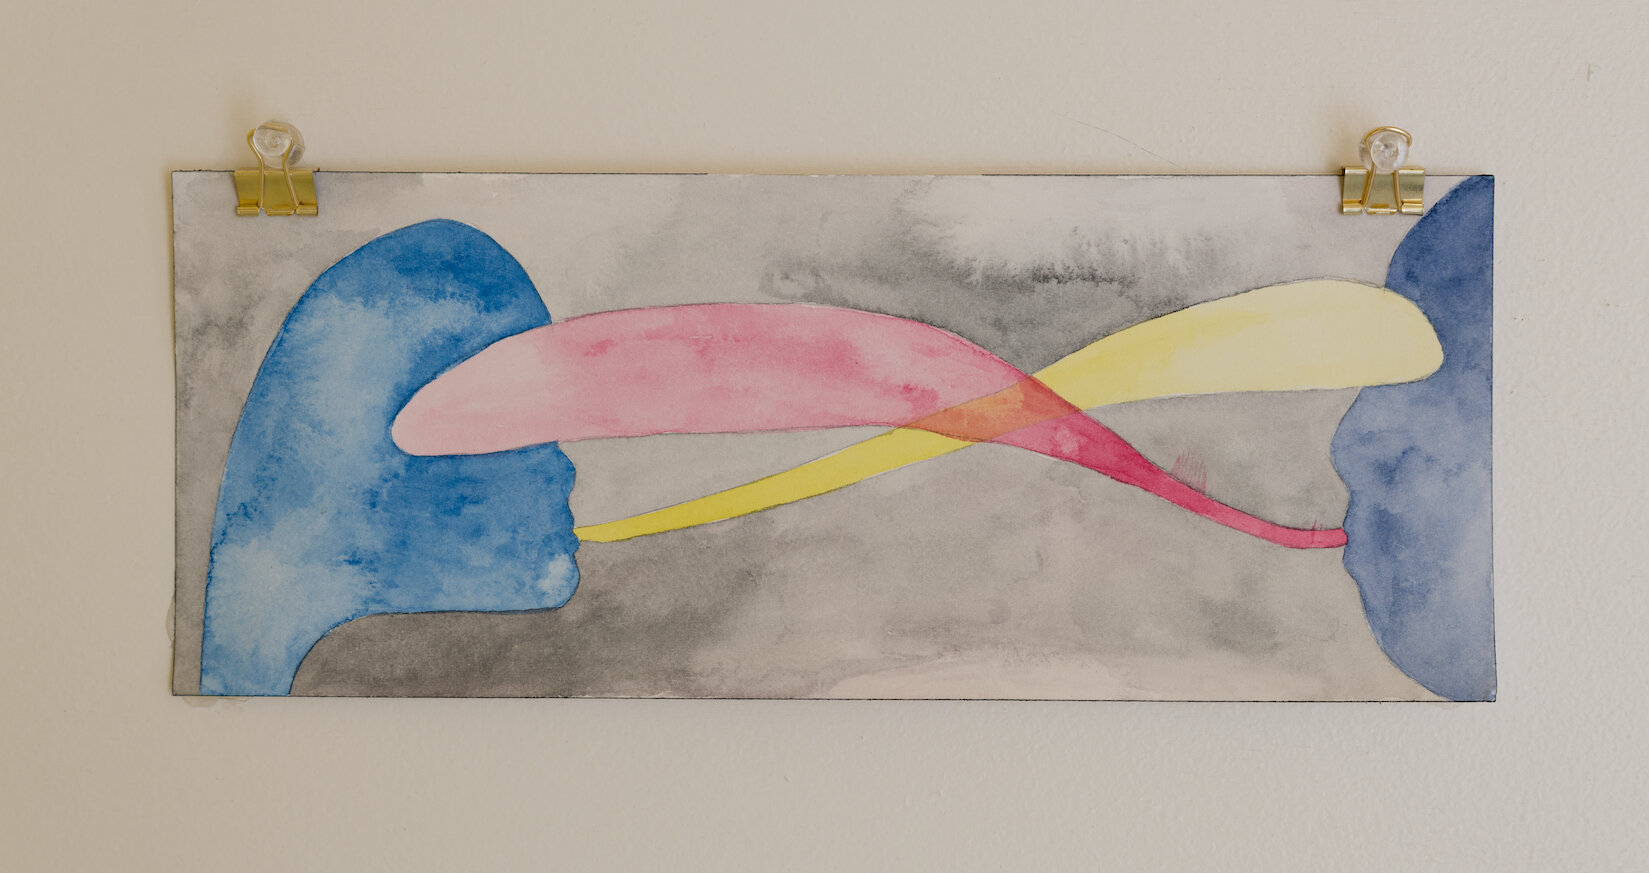  Cliff Hengst  Untitled,  2​020, watercolor on paper, 4 x 10 inches 